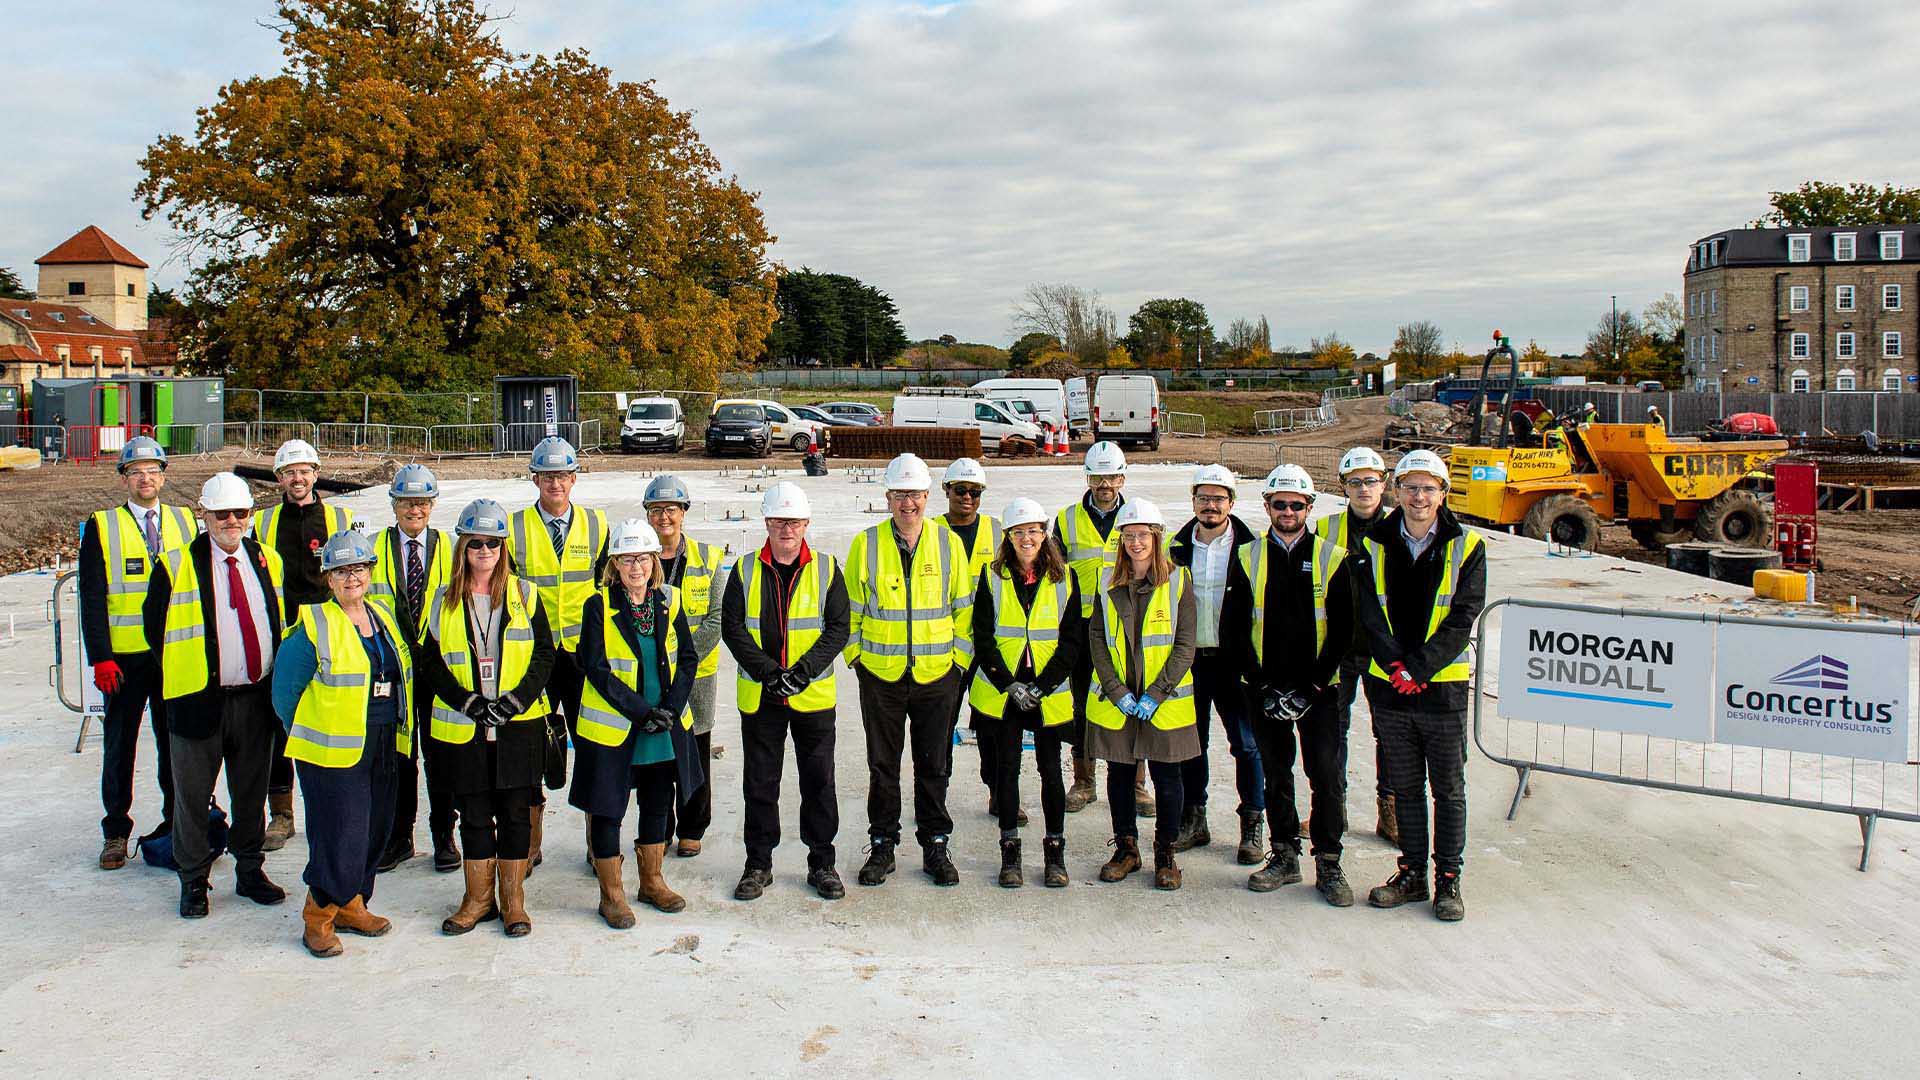 Held on the 11th November at the site of the future St Luke’s Park Primary School and Nursery, the ceremony was hosted by Morgan Sindall Construction, which is the main contractor on the project, and was attended by Essex County Councillors Tony Ball and Ian Grundy.